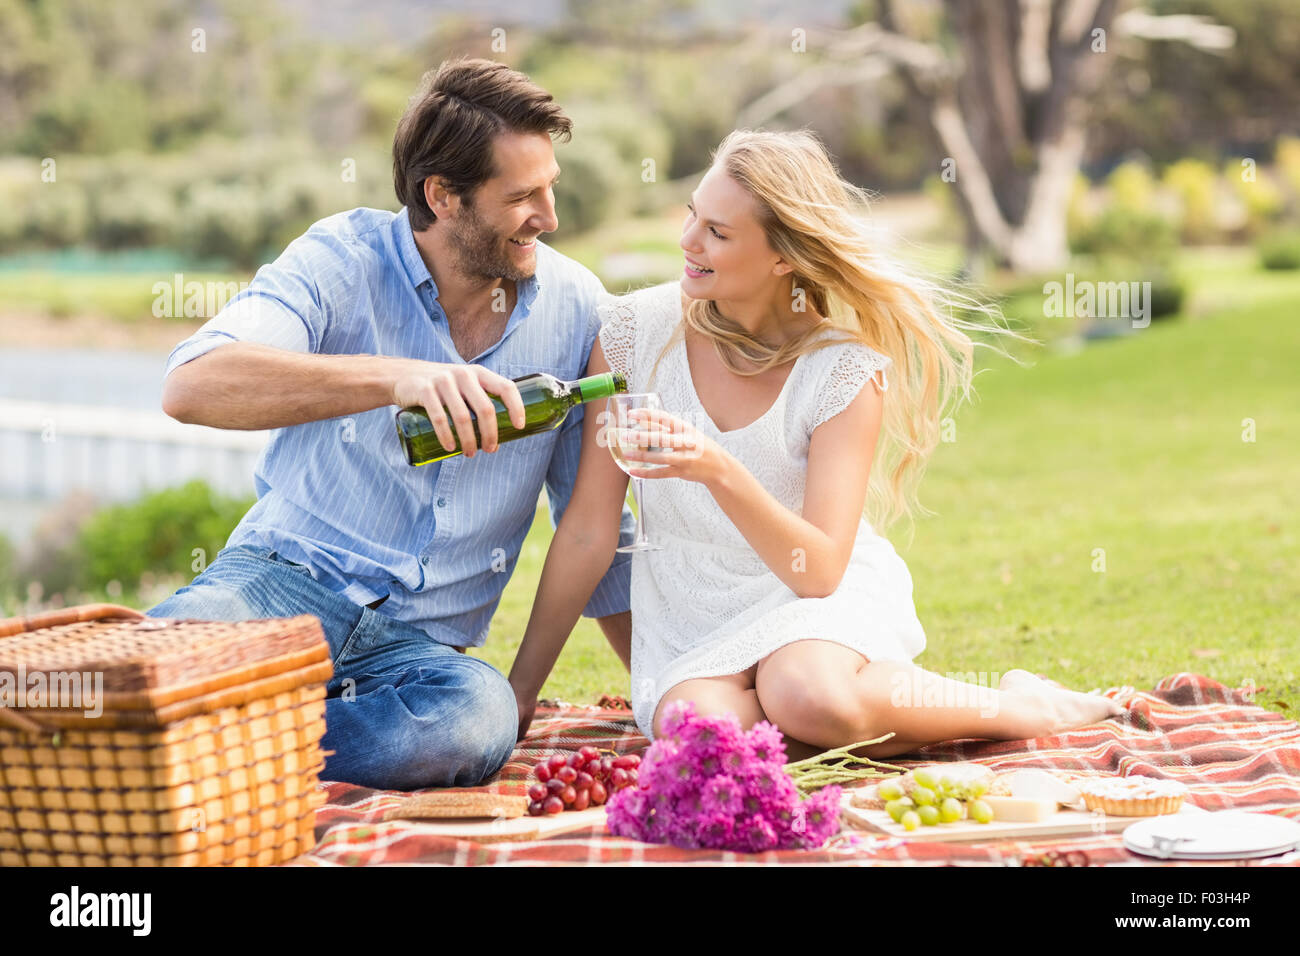 Cute couple on date pouring wine in a glass Stock Photo